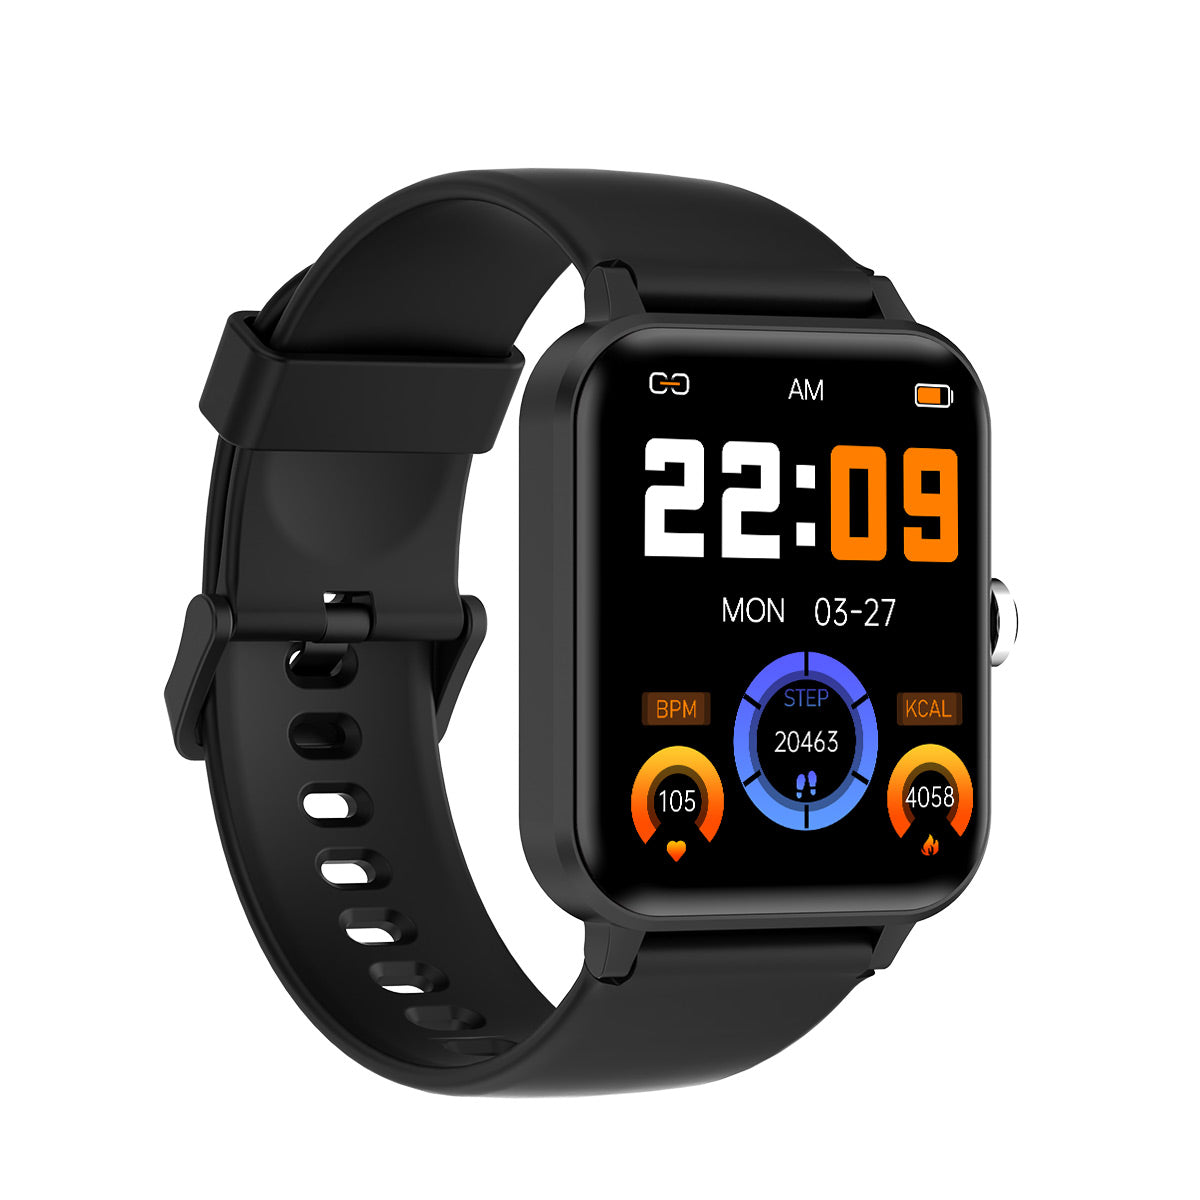 Blackview R30 Cool Fitness Smartwatch - Blackview Global – Blackview  Official Store